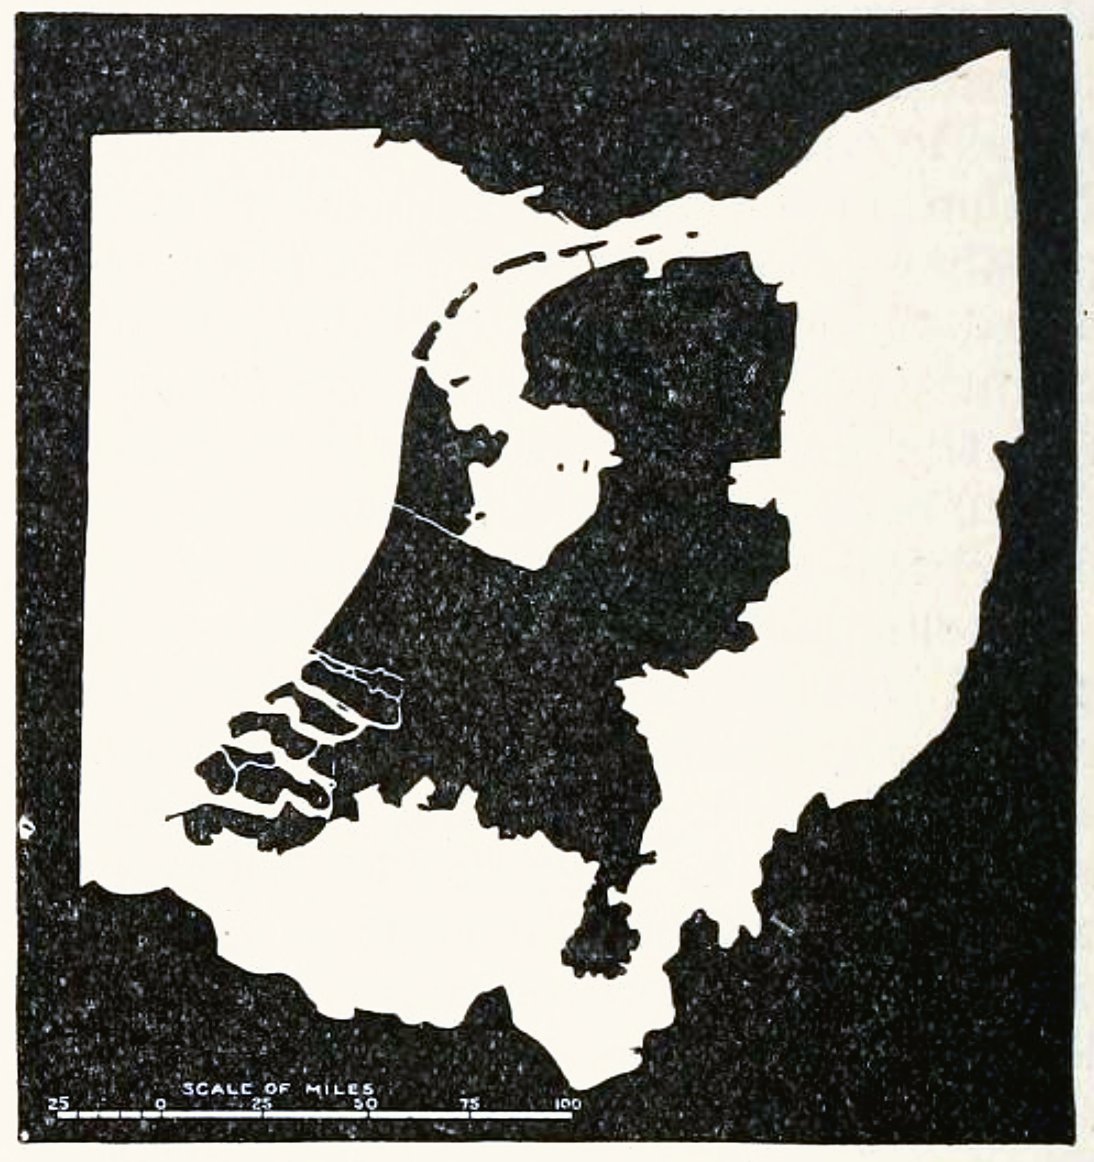 14. The Netherlands and Ohio, 1901.  https://archive.org/details/nationalgeograph121901nati/page/220/mode/2up